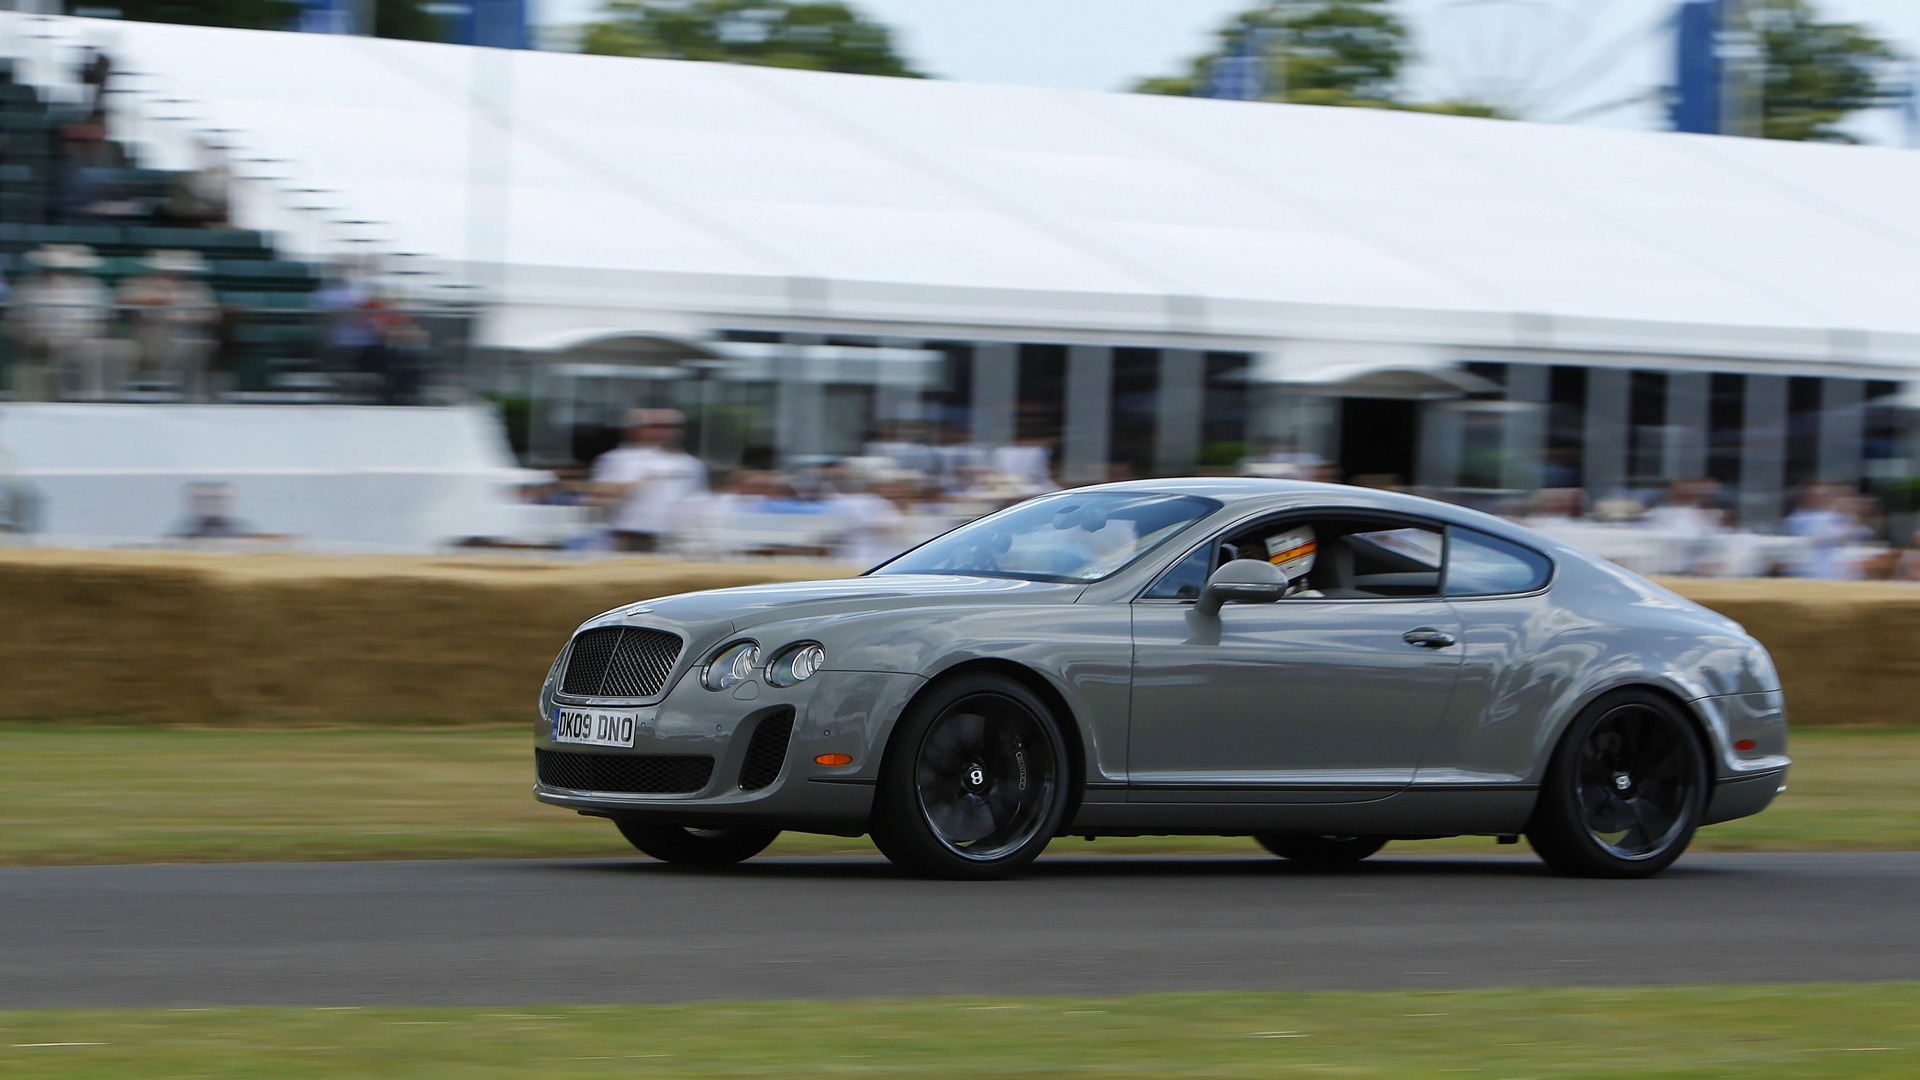 Bentley Continental Supersports - 2009 宾利12 - 1920x1080